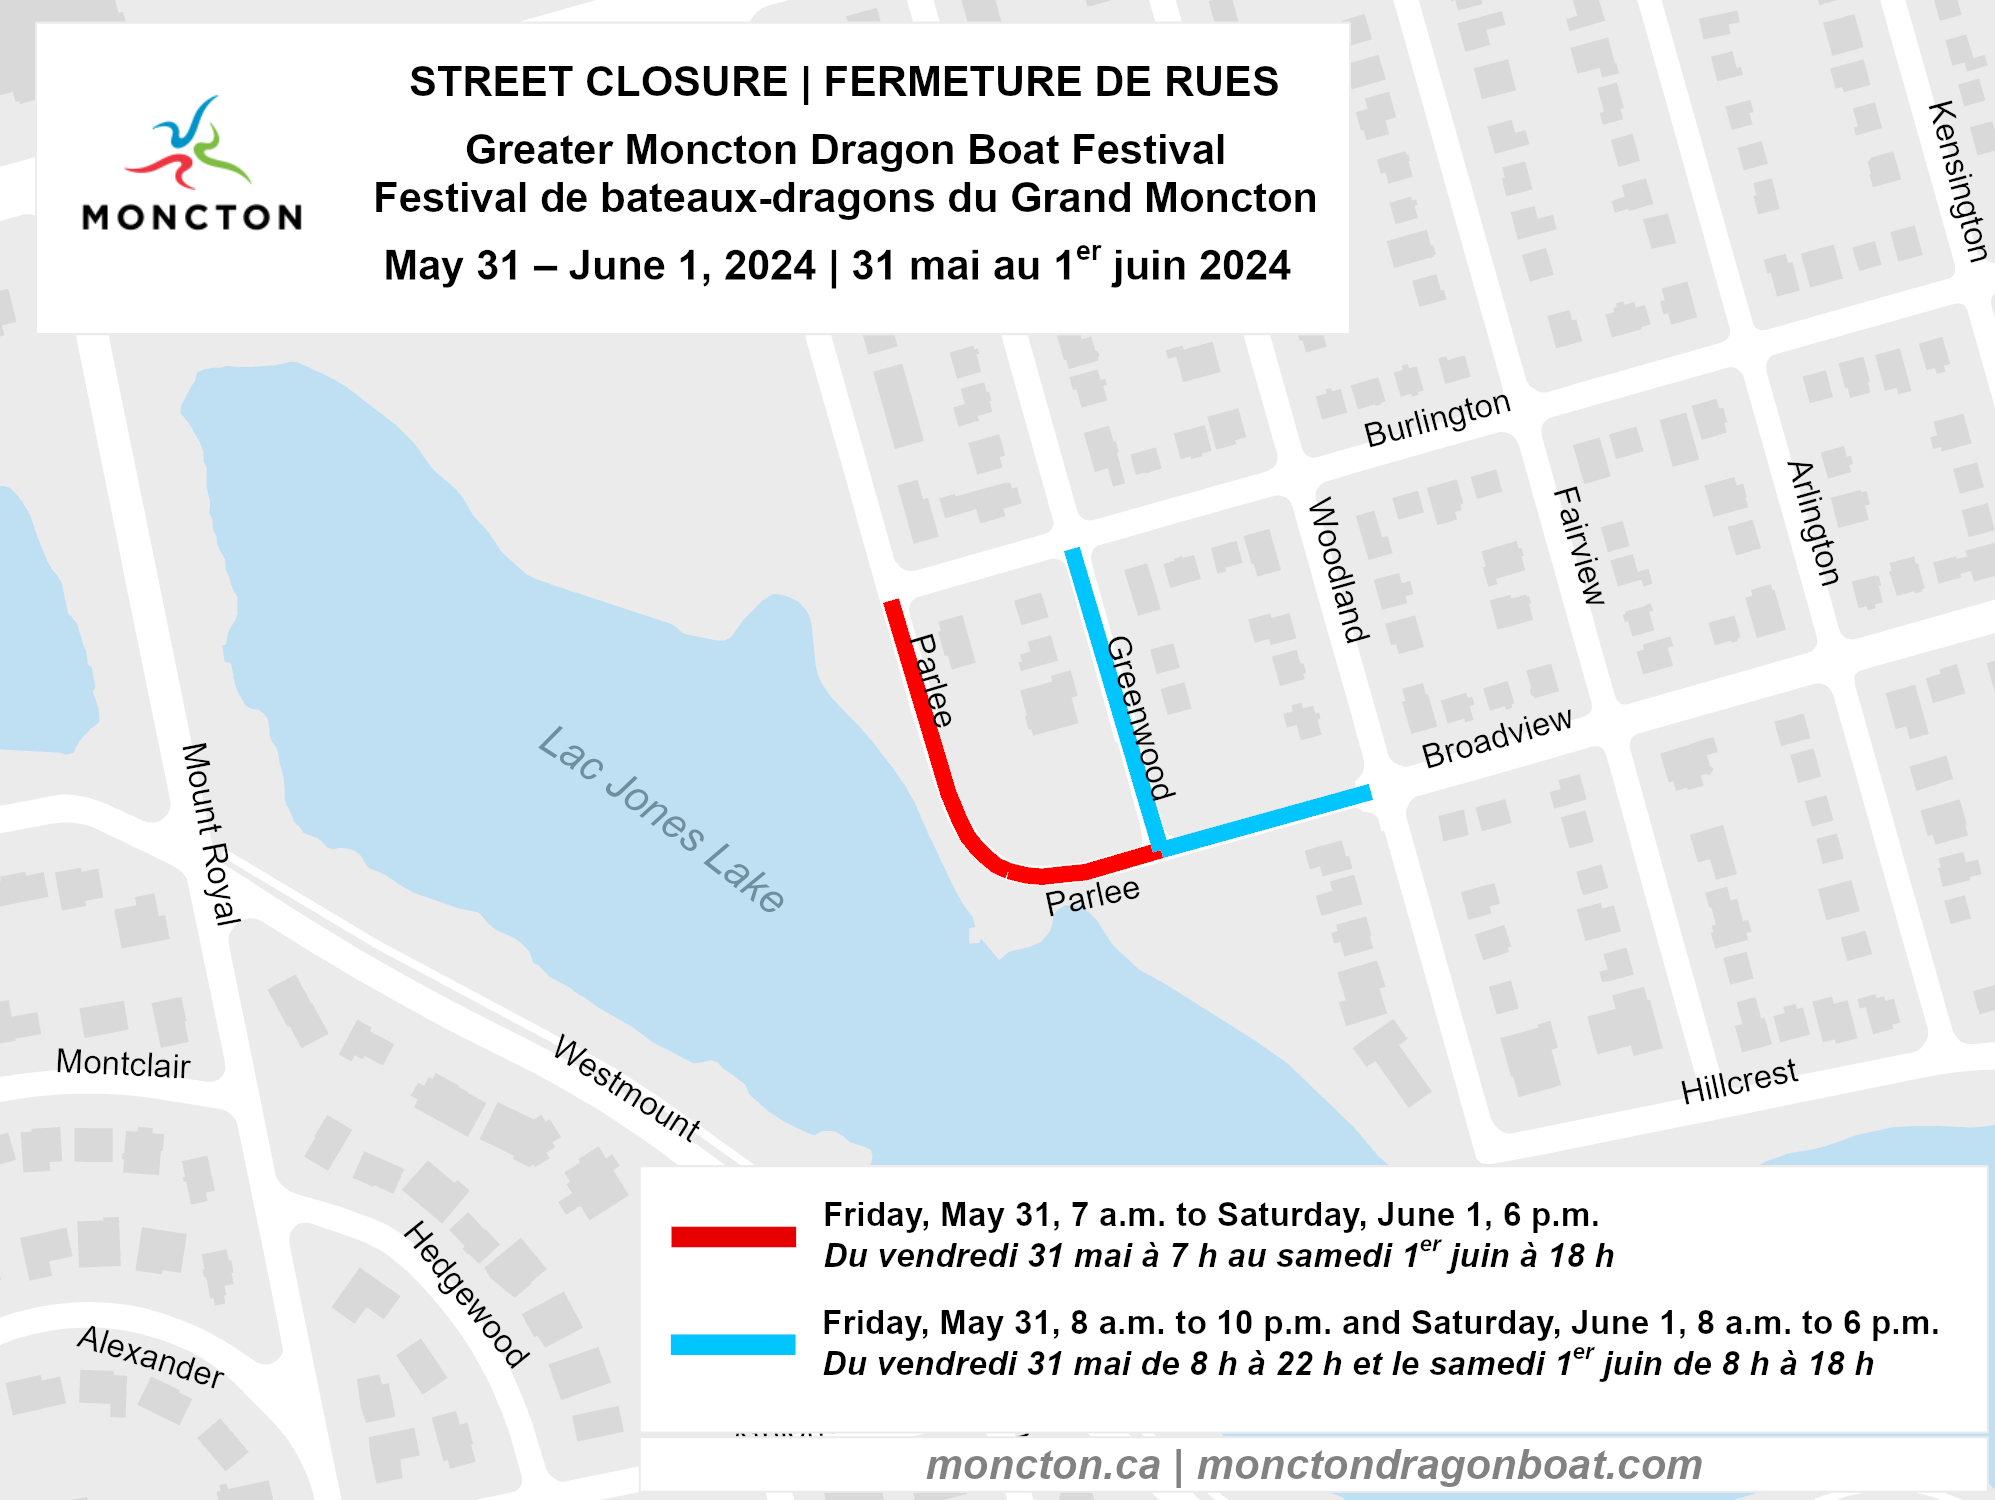 Street closure map for the Greater Moncton Dragon Boat Festival